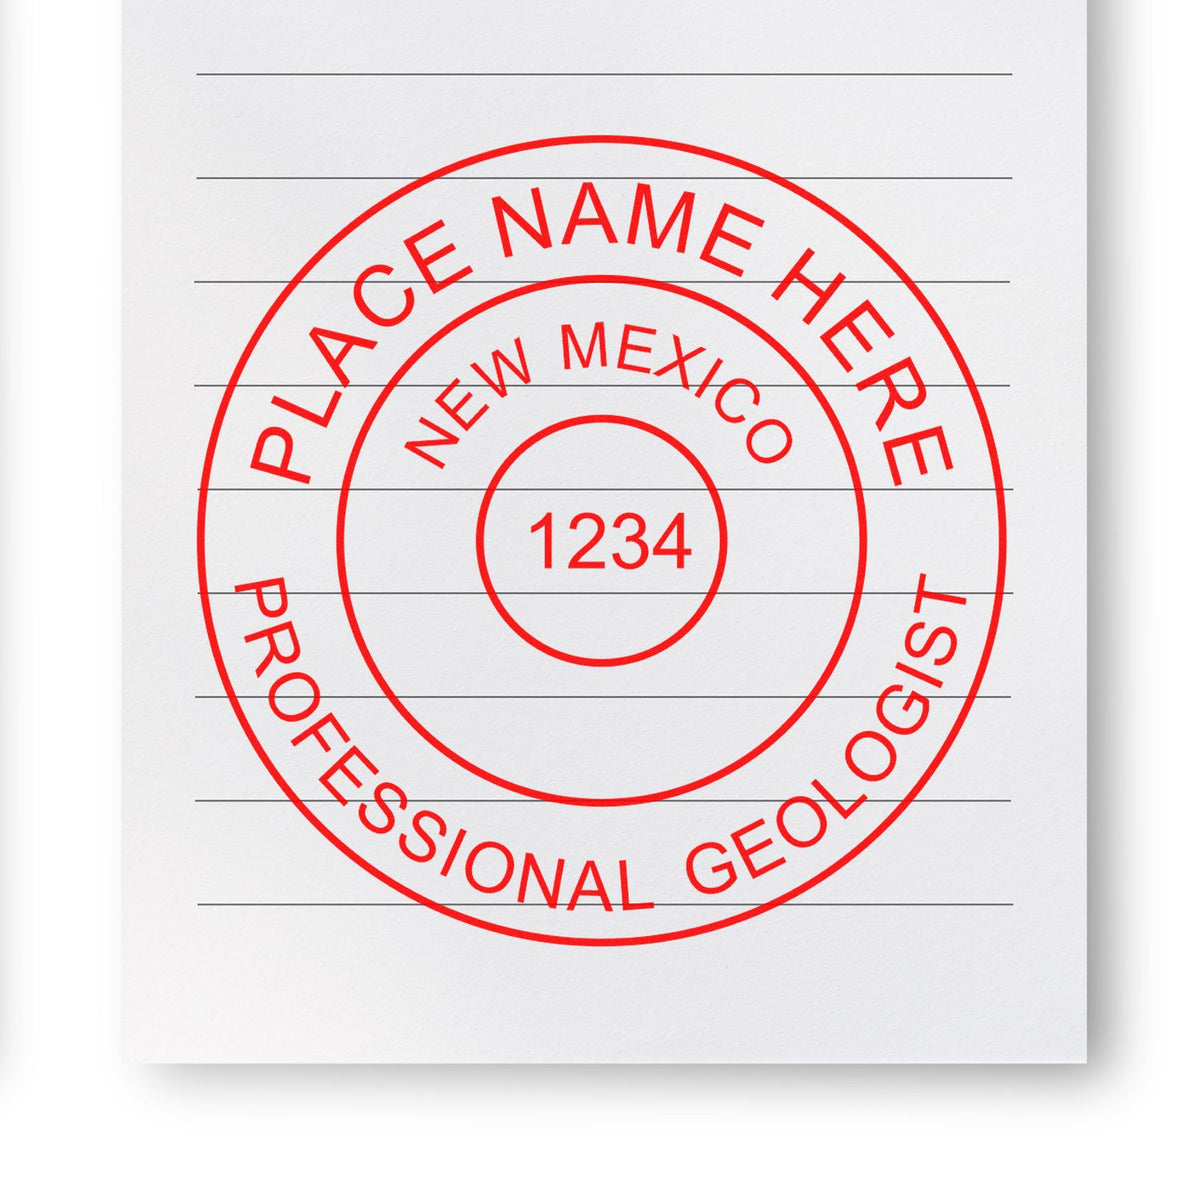 An in use photo of the New Mexico Professional Geologist Seal Stamp showing a sample imprint on a cardstock